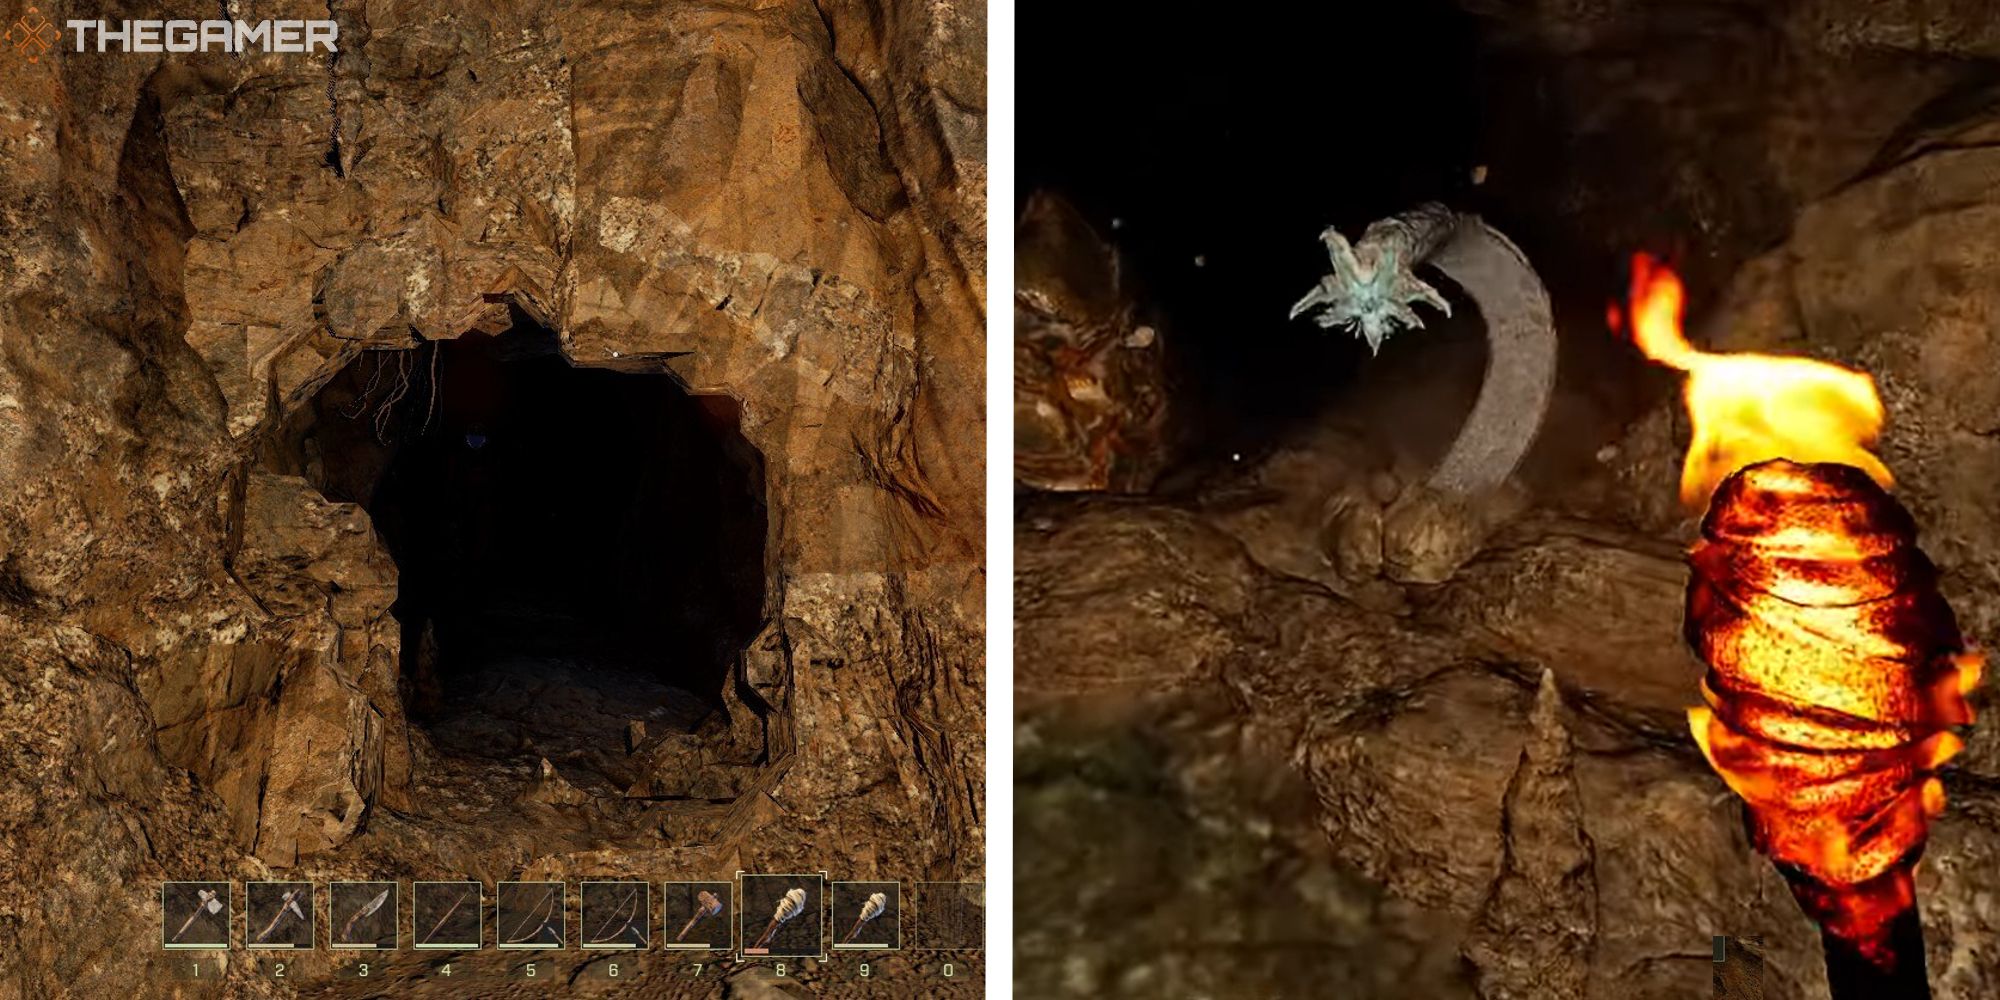 image of cave next to image of player looking at a cave worm